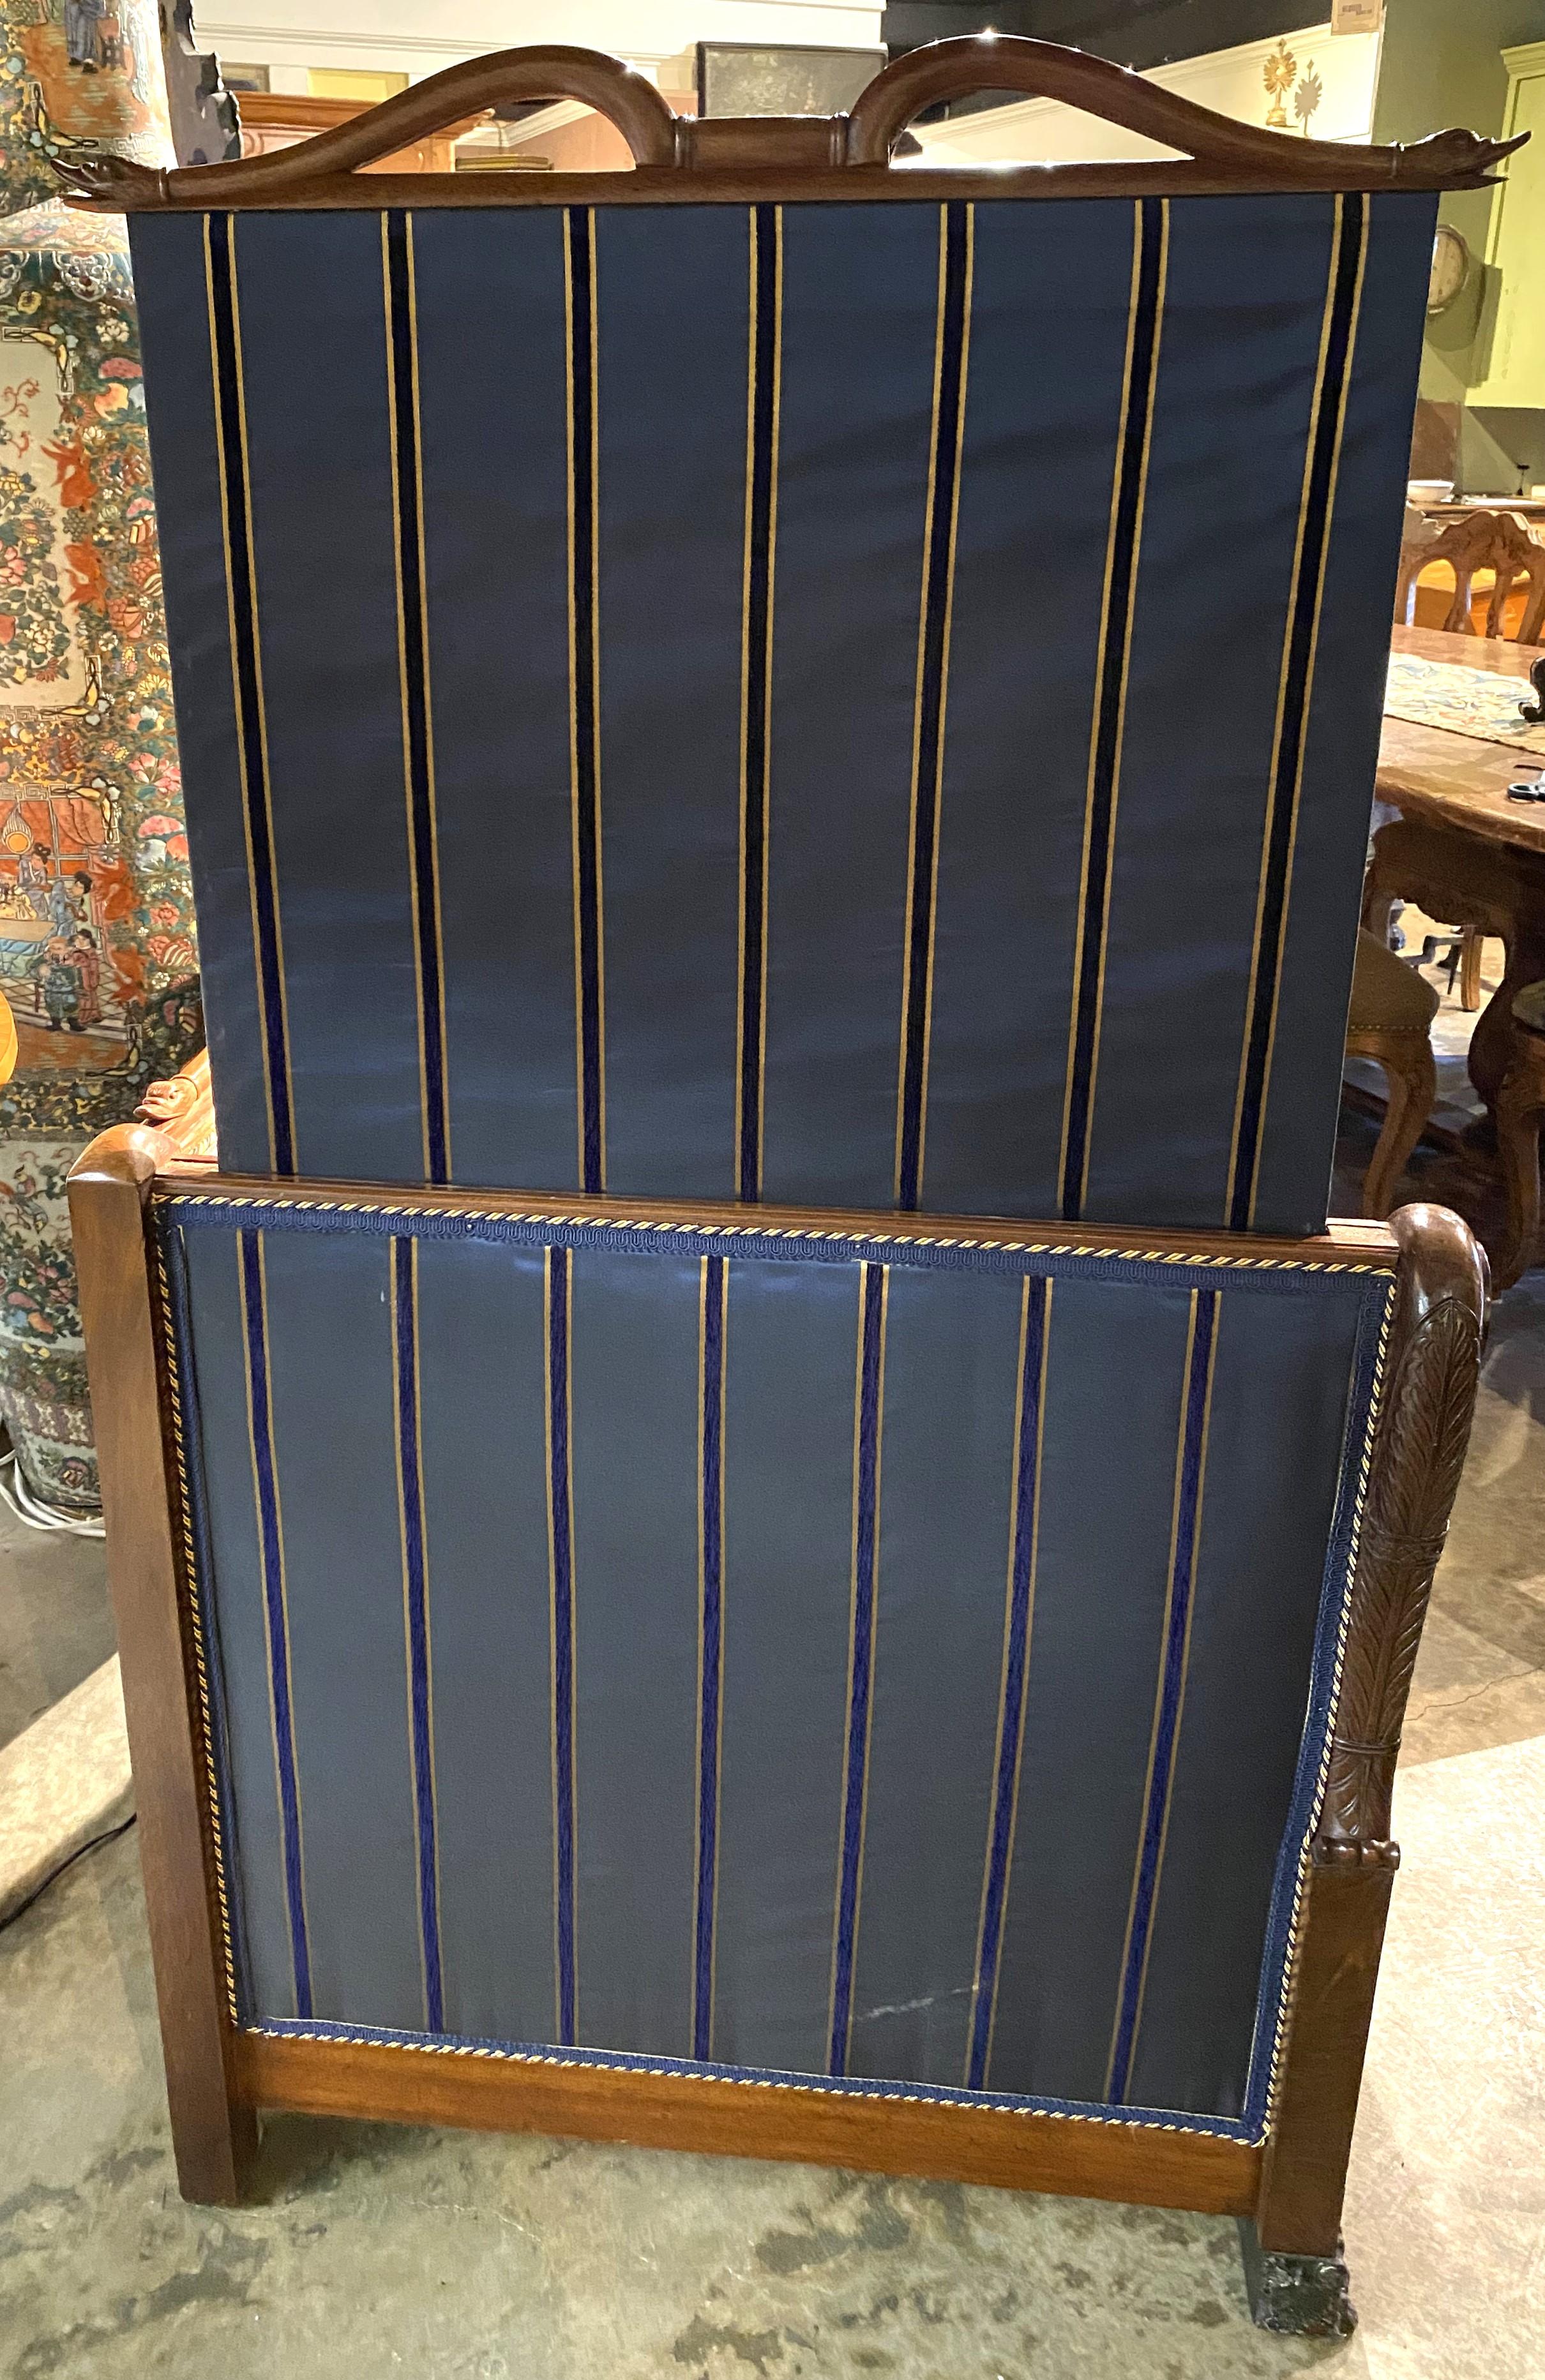 19th Century French Empire “Kissing Settee” with Privacy Screens In Good Condition For Sale In Milford, NH